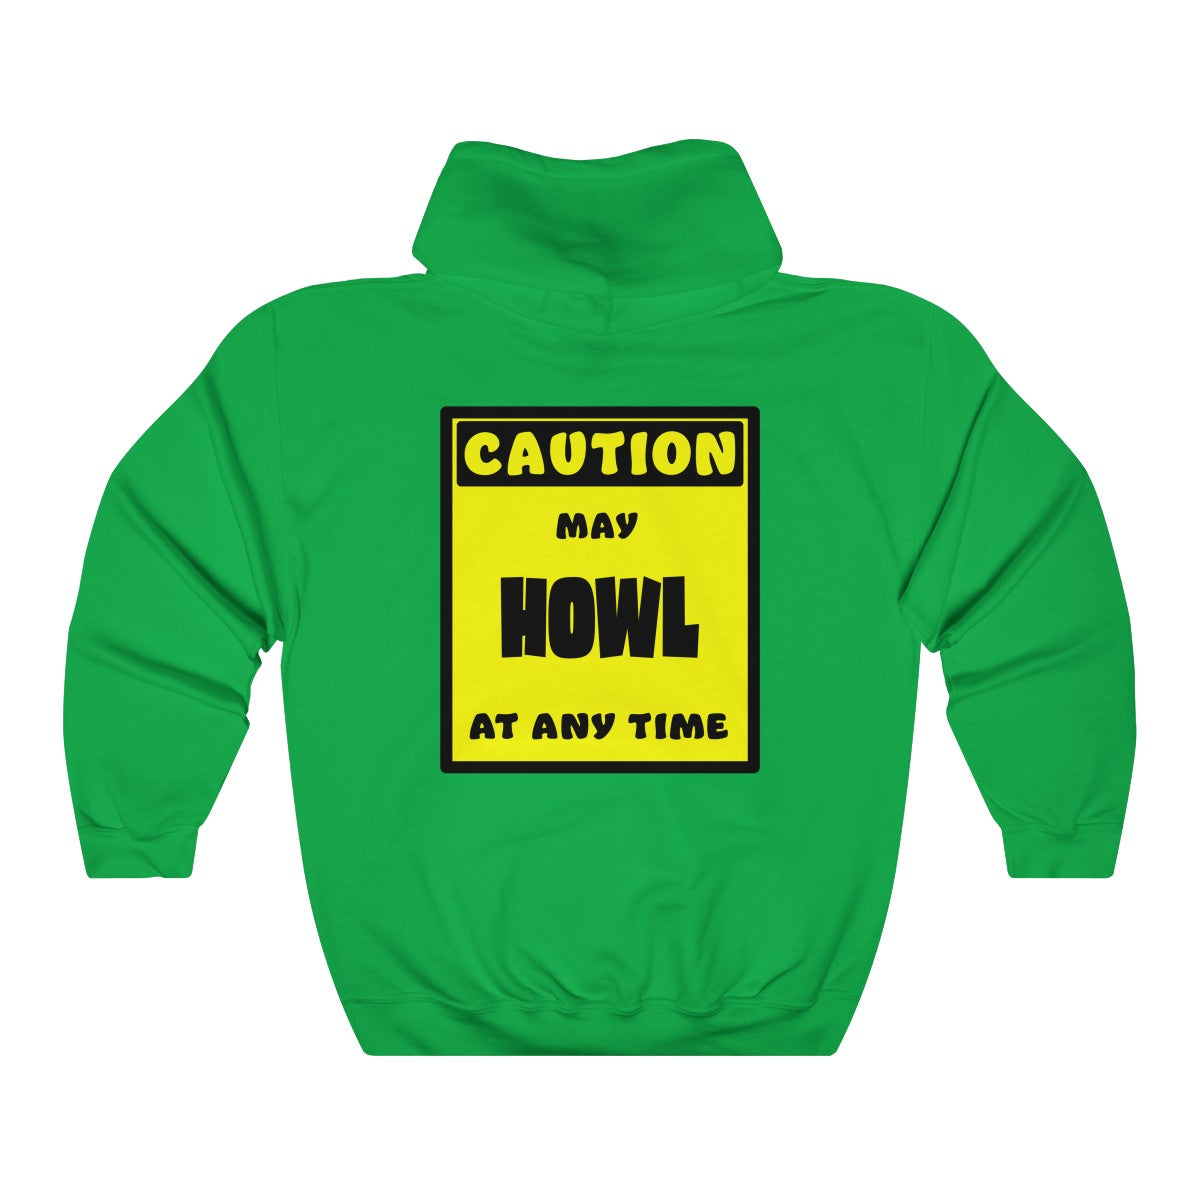 CAUTION! May HOWL at any time! - Hoodie Hoodie AFLT-Whootorca Green S 